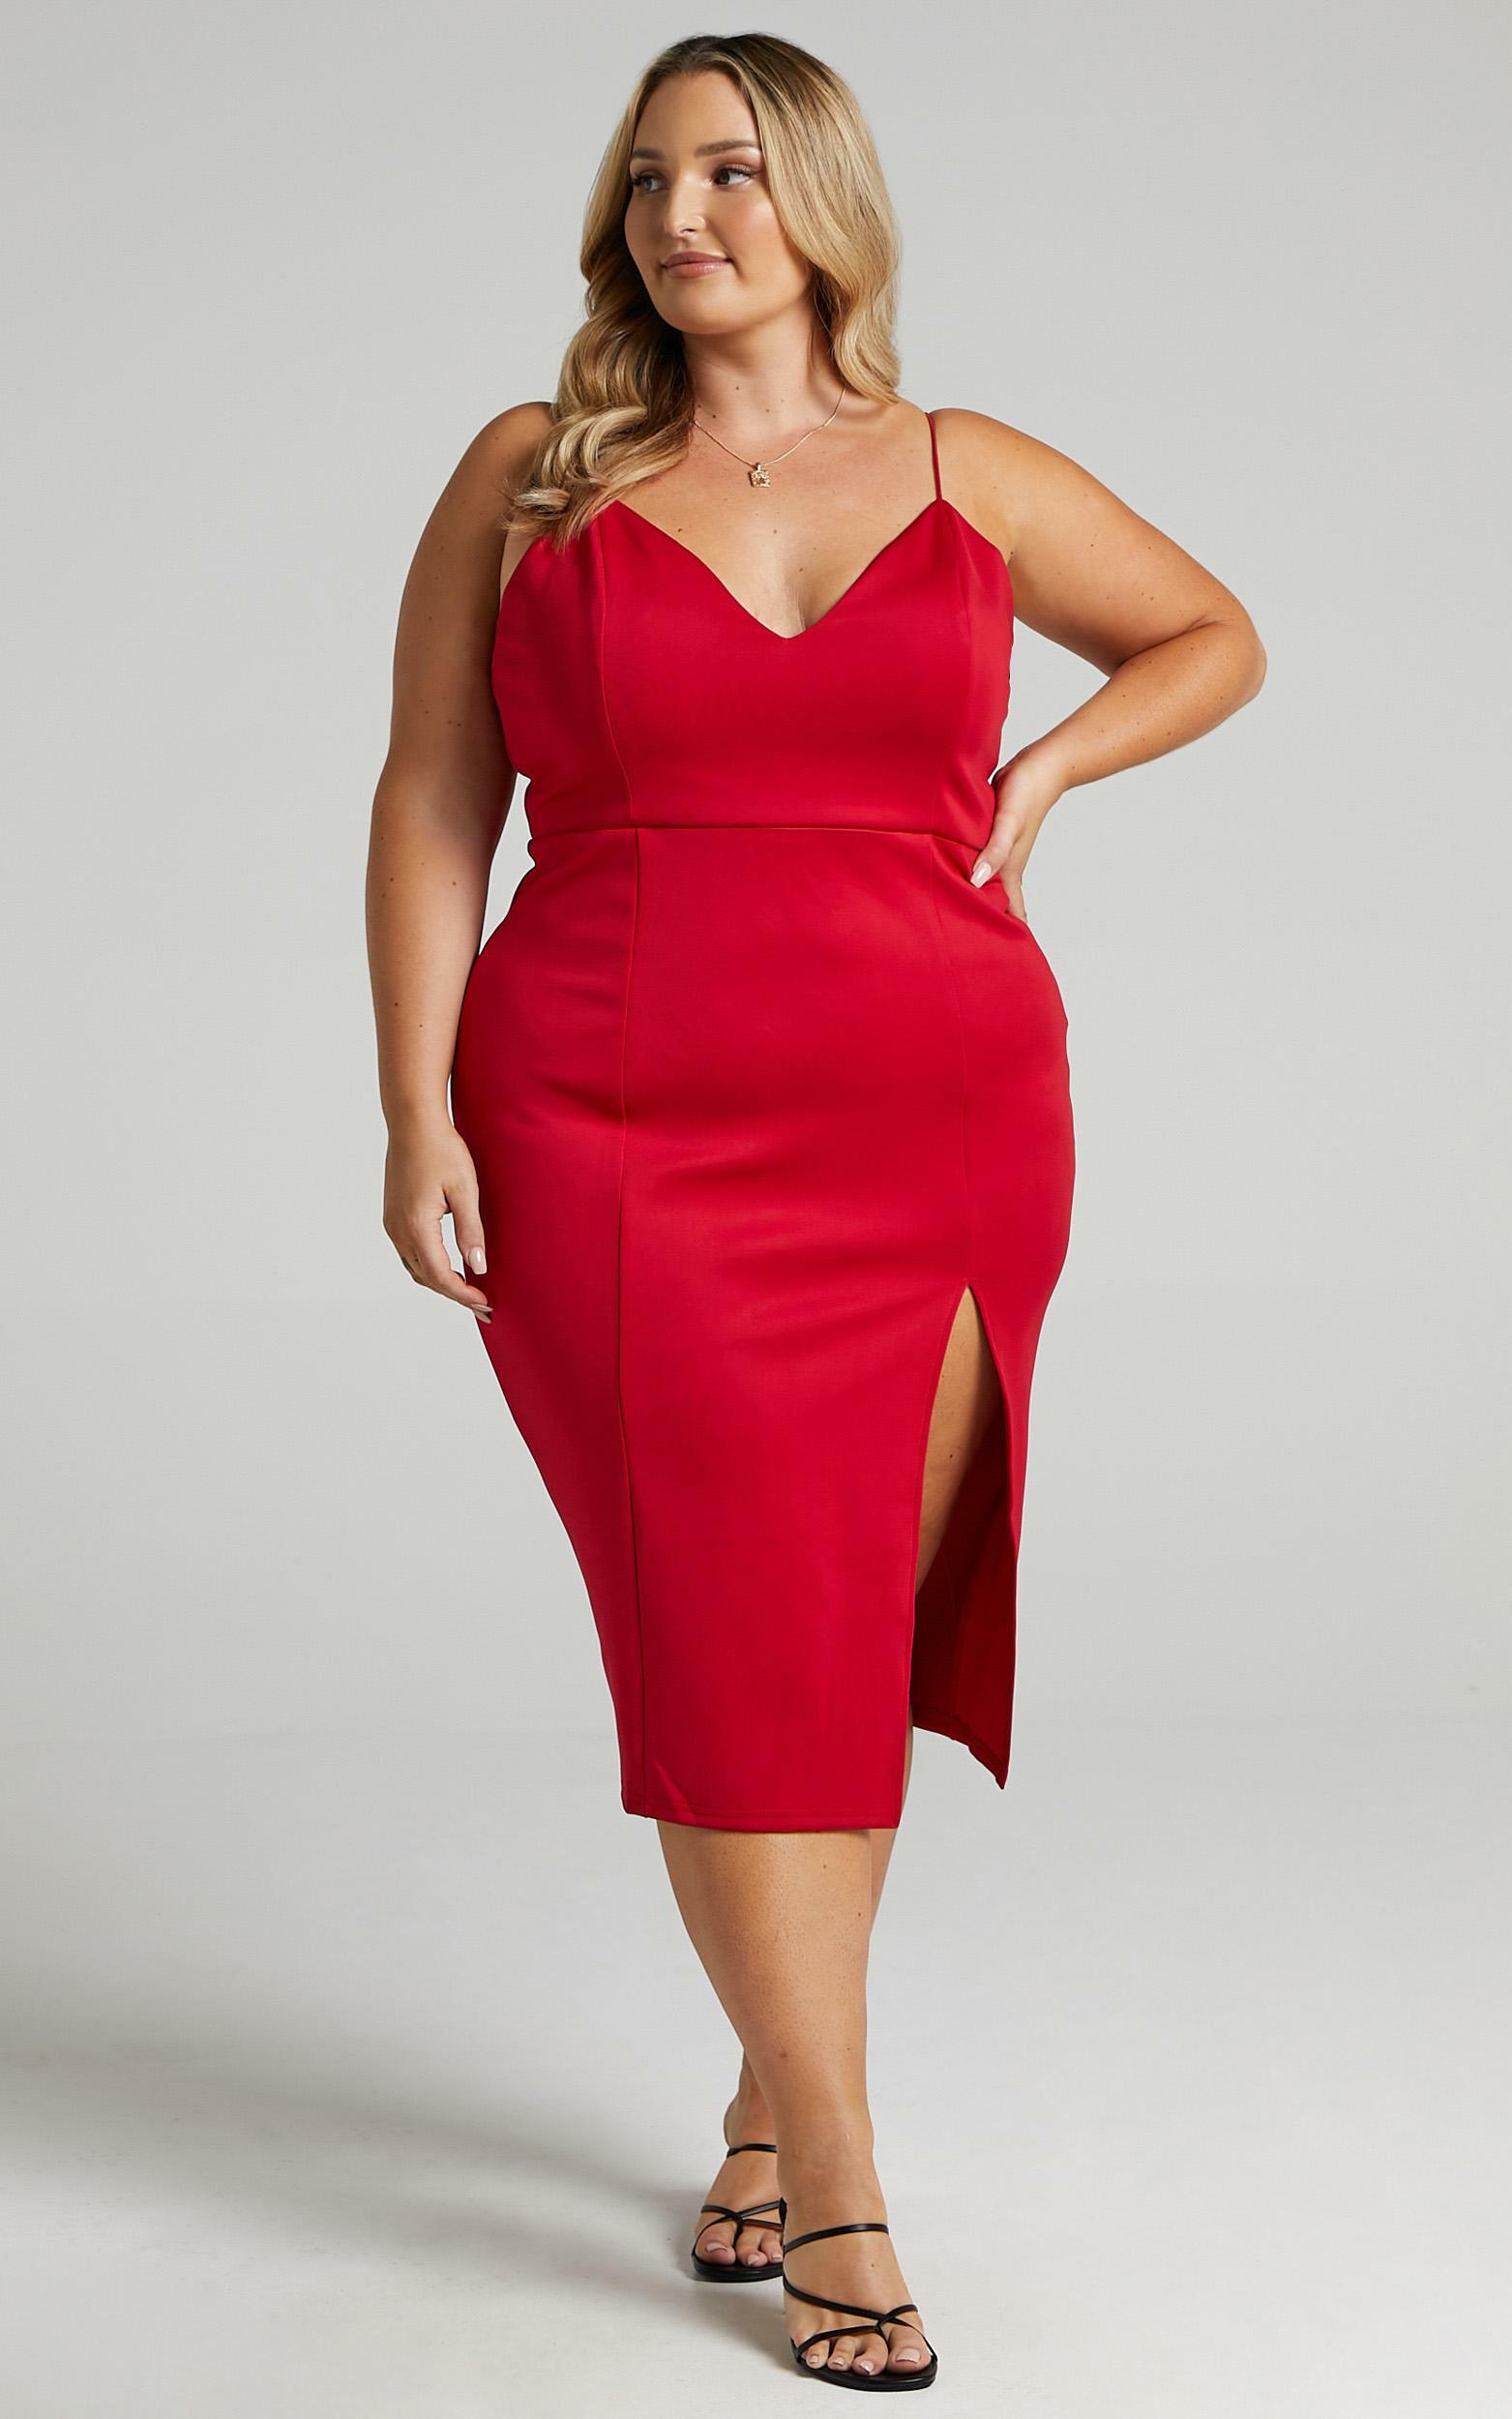 Big Ideas Midi Dress in Red - 04, RED4, hi-res image number null